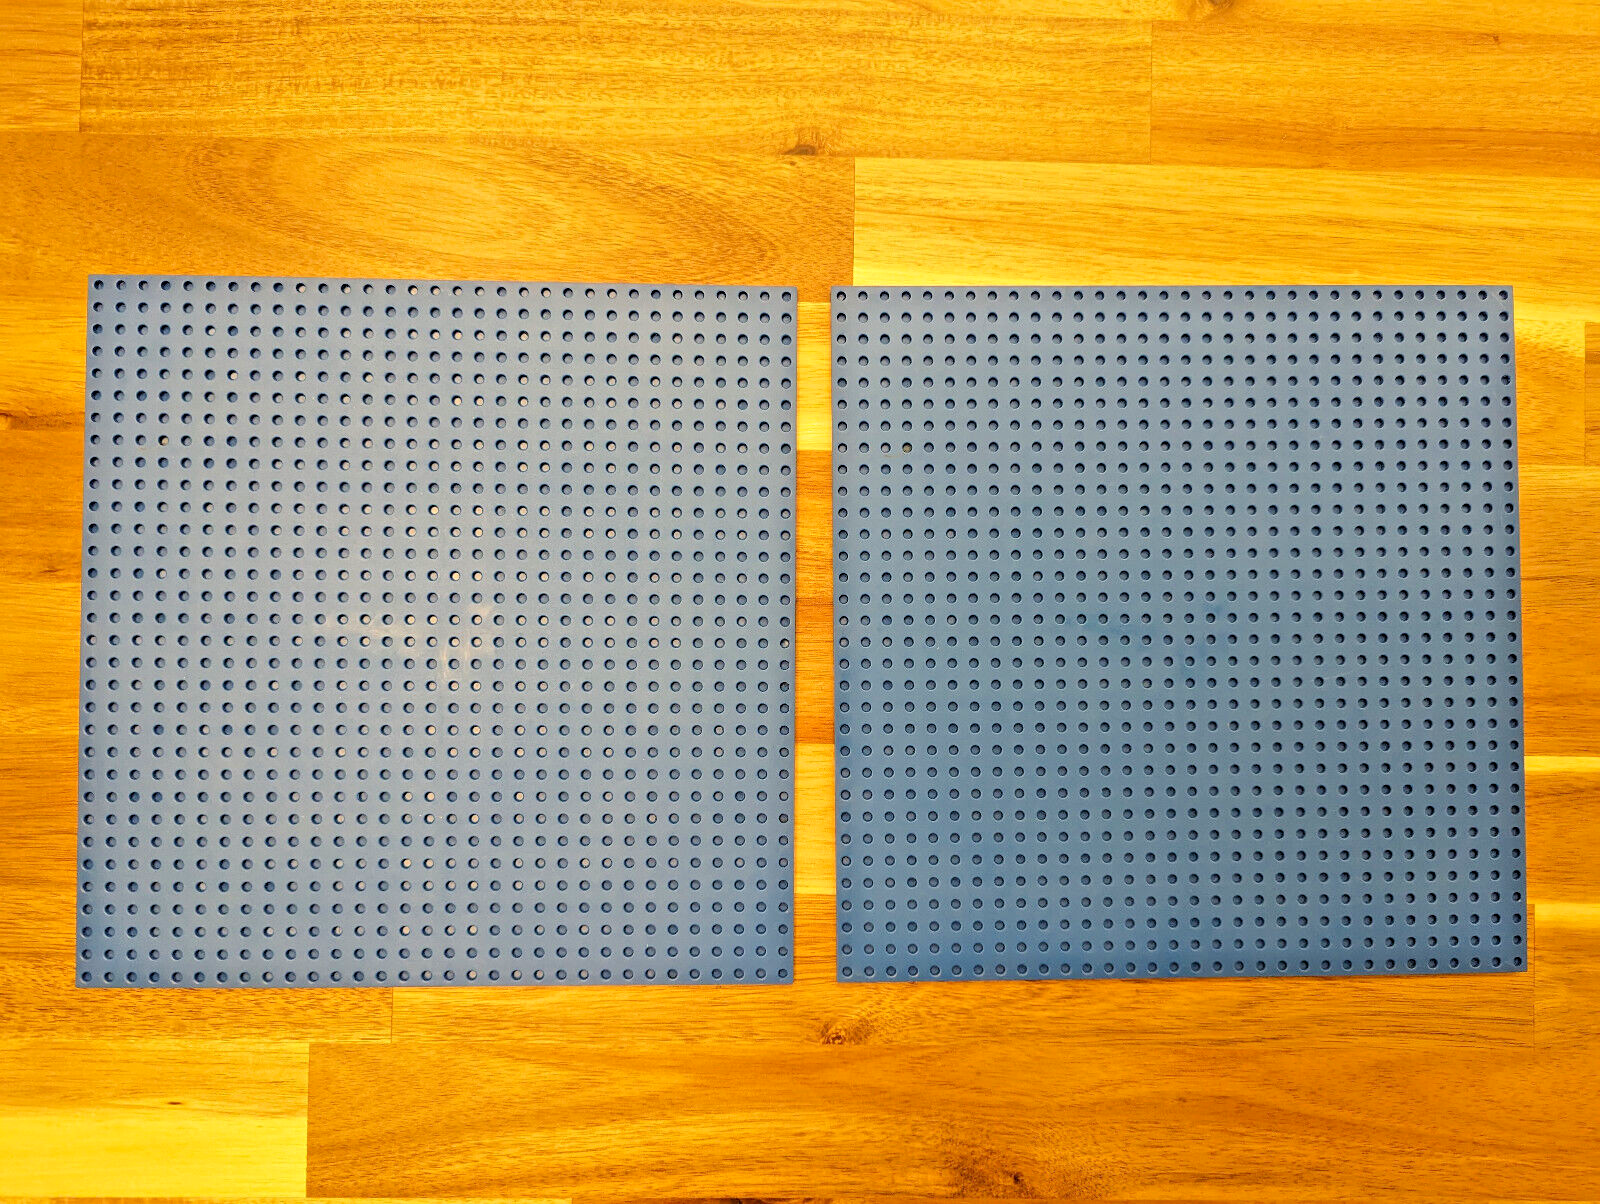 Base Plate 32x32 10x10” Lot Of 2 Blue LEGO Compatible